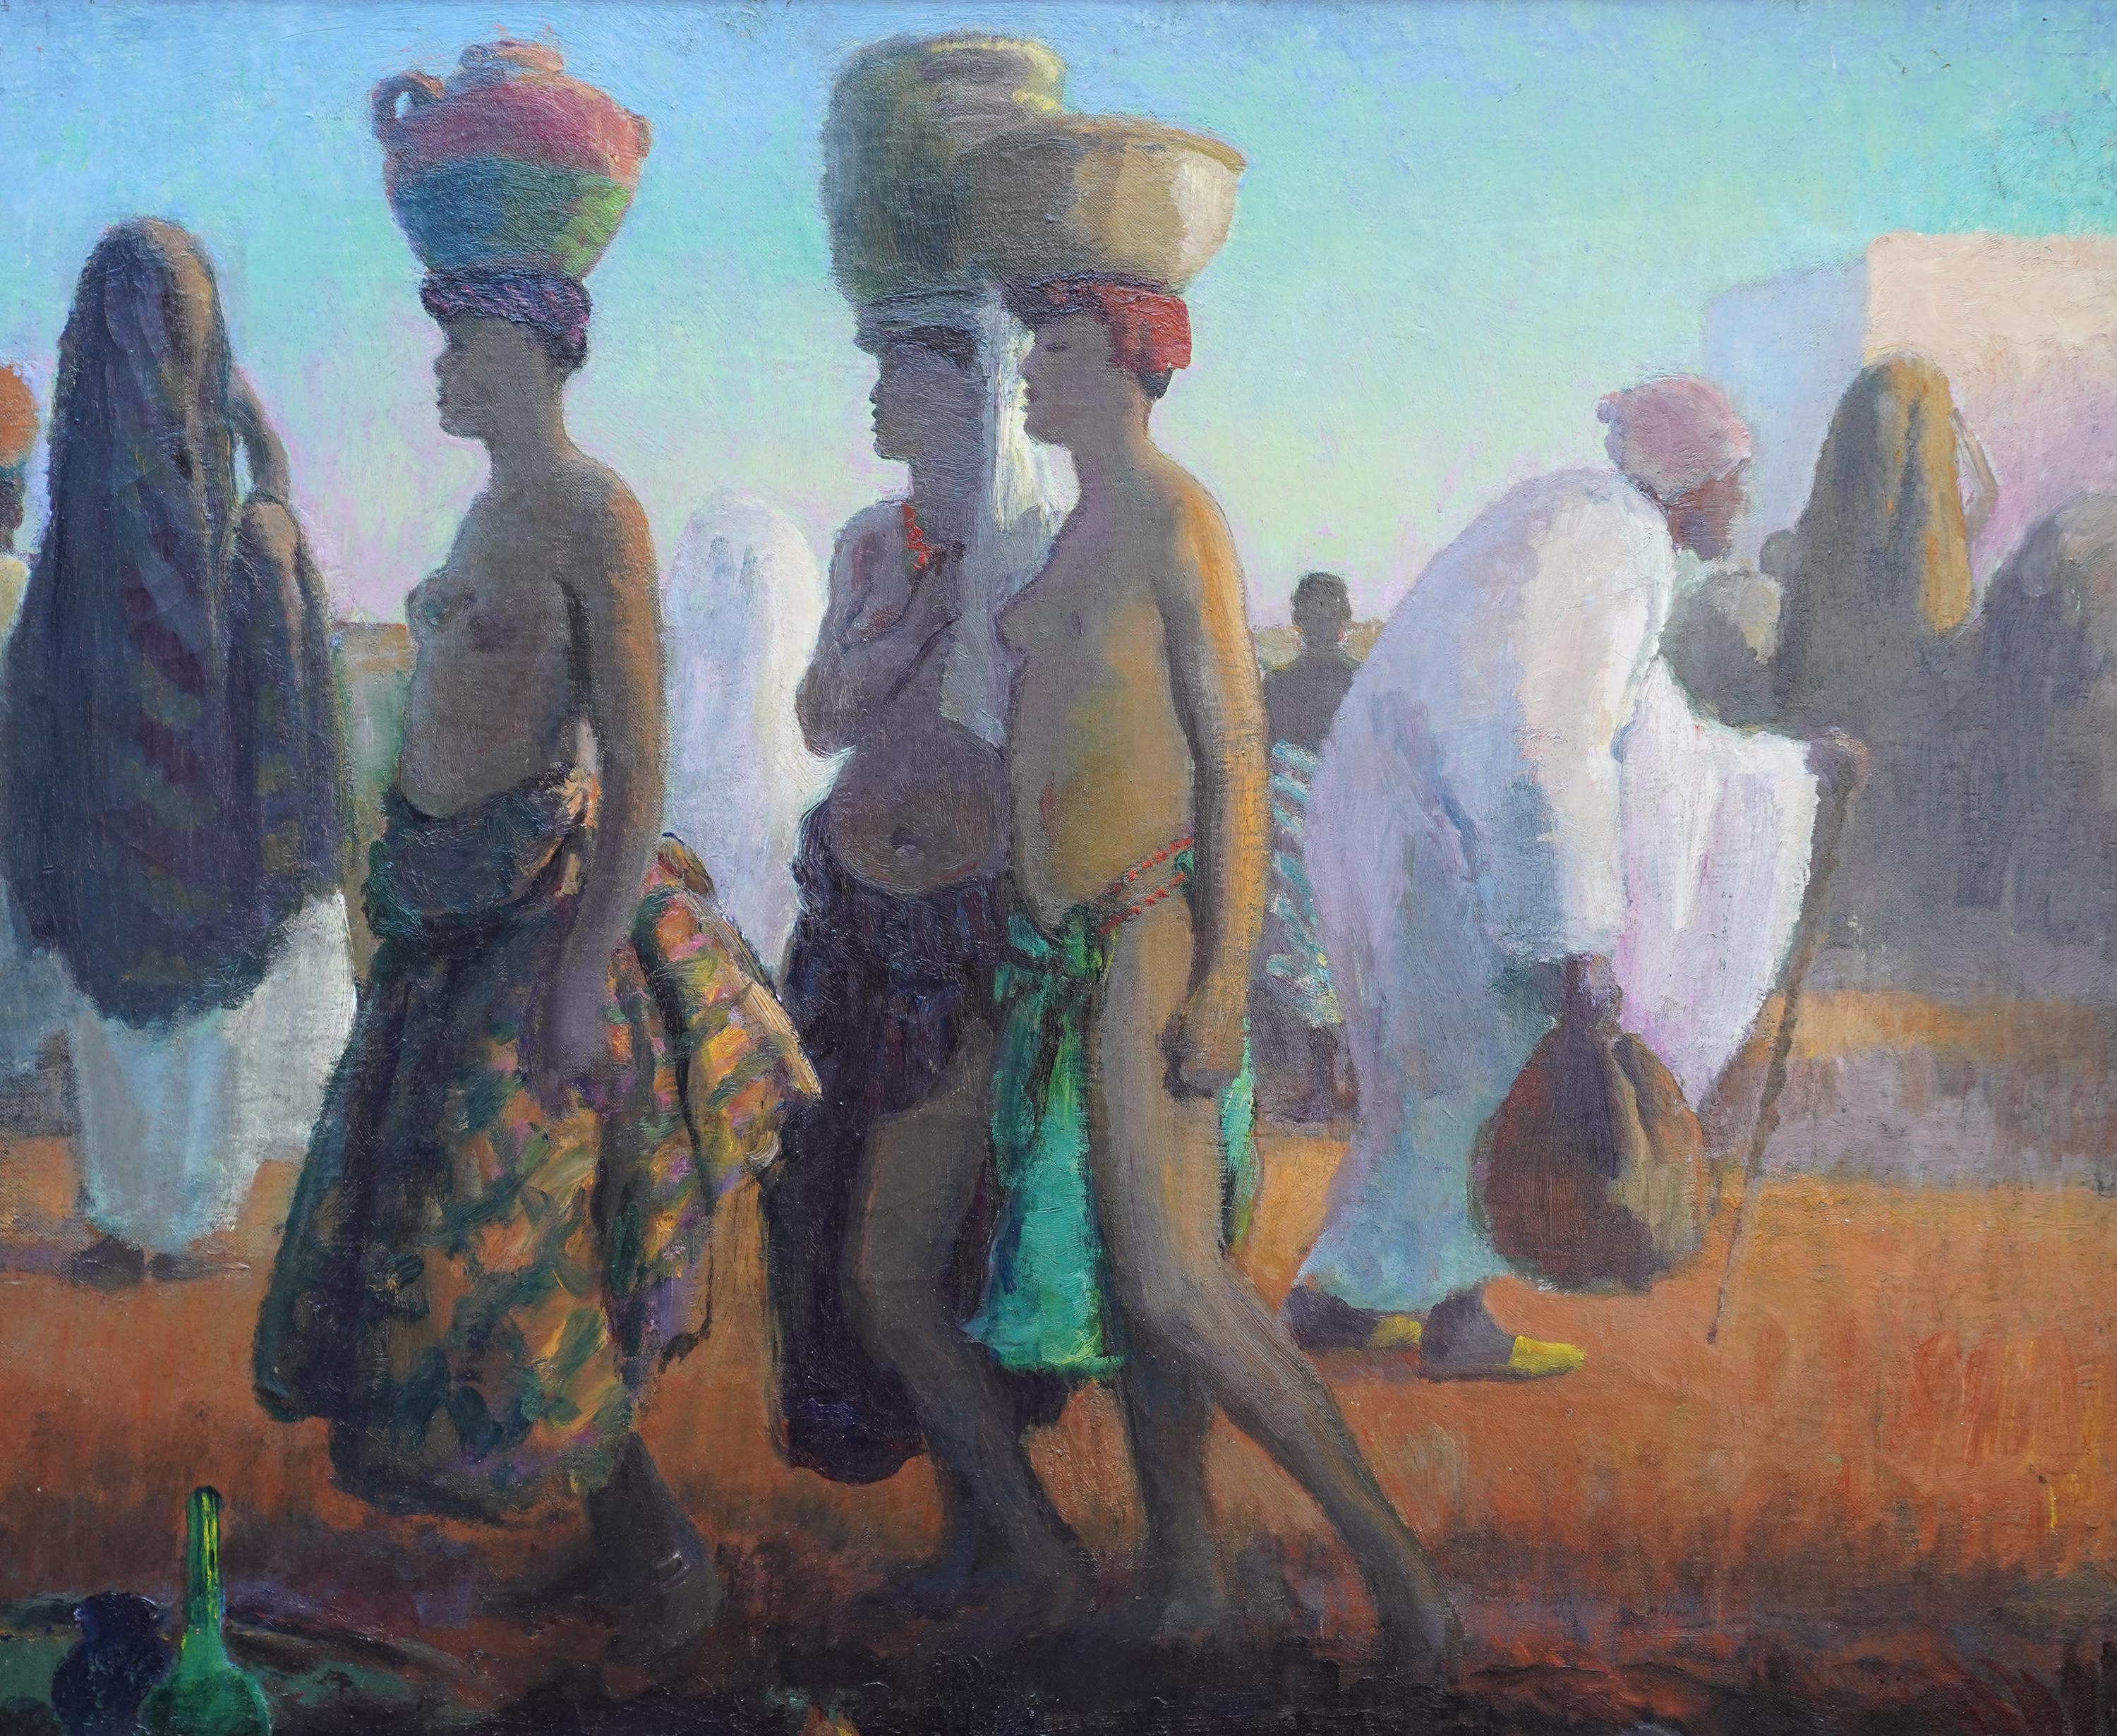 Portrait of Water Bearers, Africa - British 1920's Orientalist art oil painting - Painting by Spencer Pryse